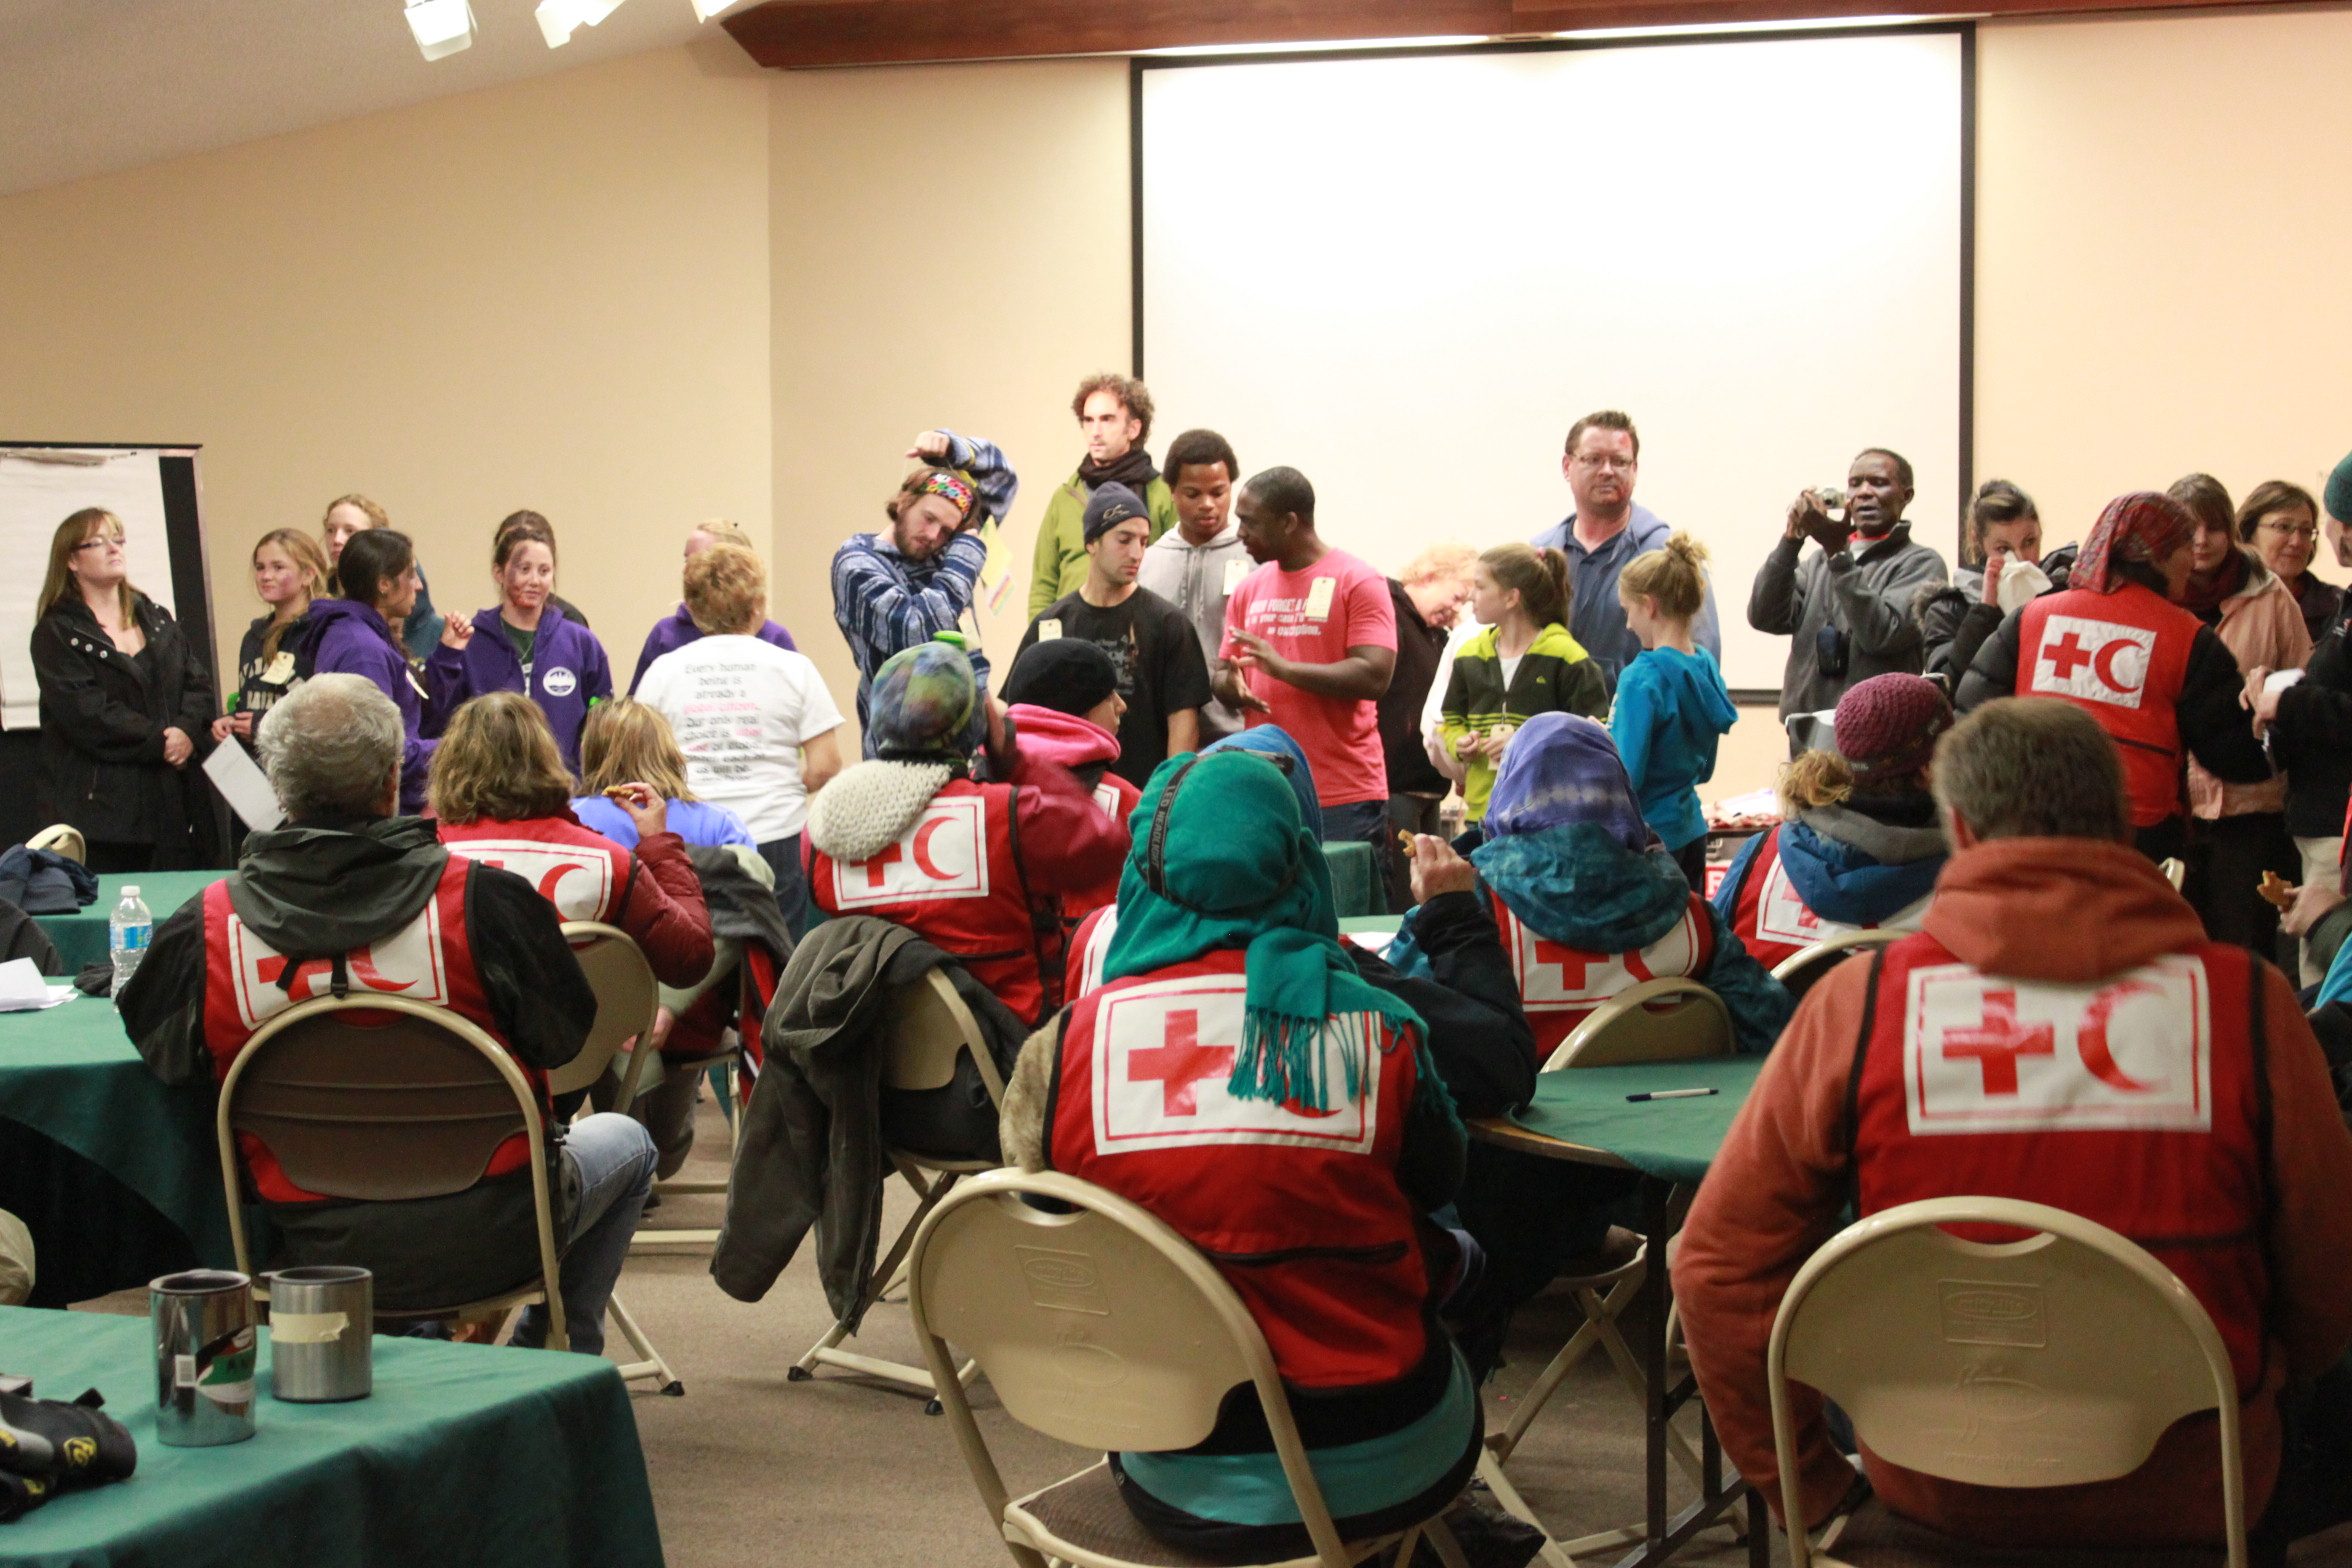 When the training exercise is finished, the Red Cross delegates meet the volunteers before they have a full debrief